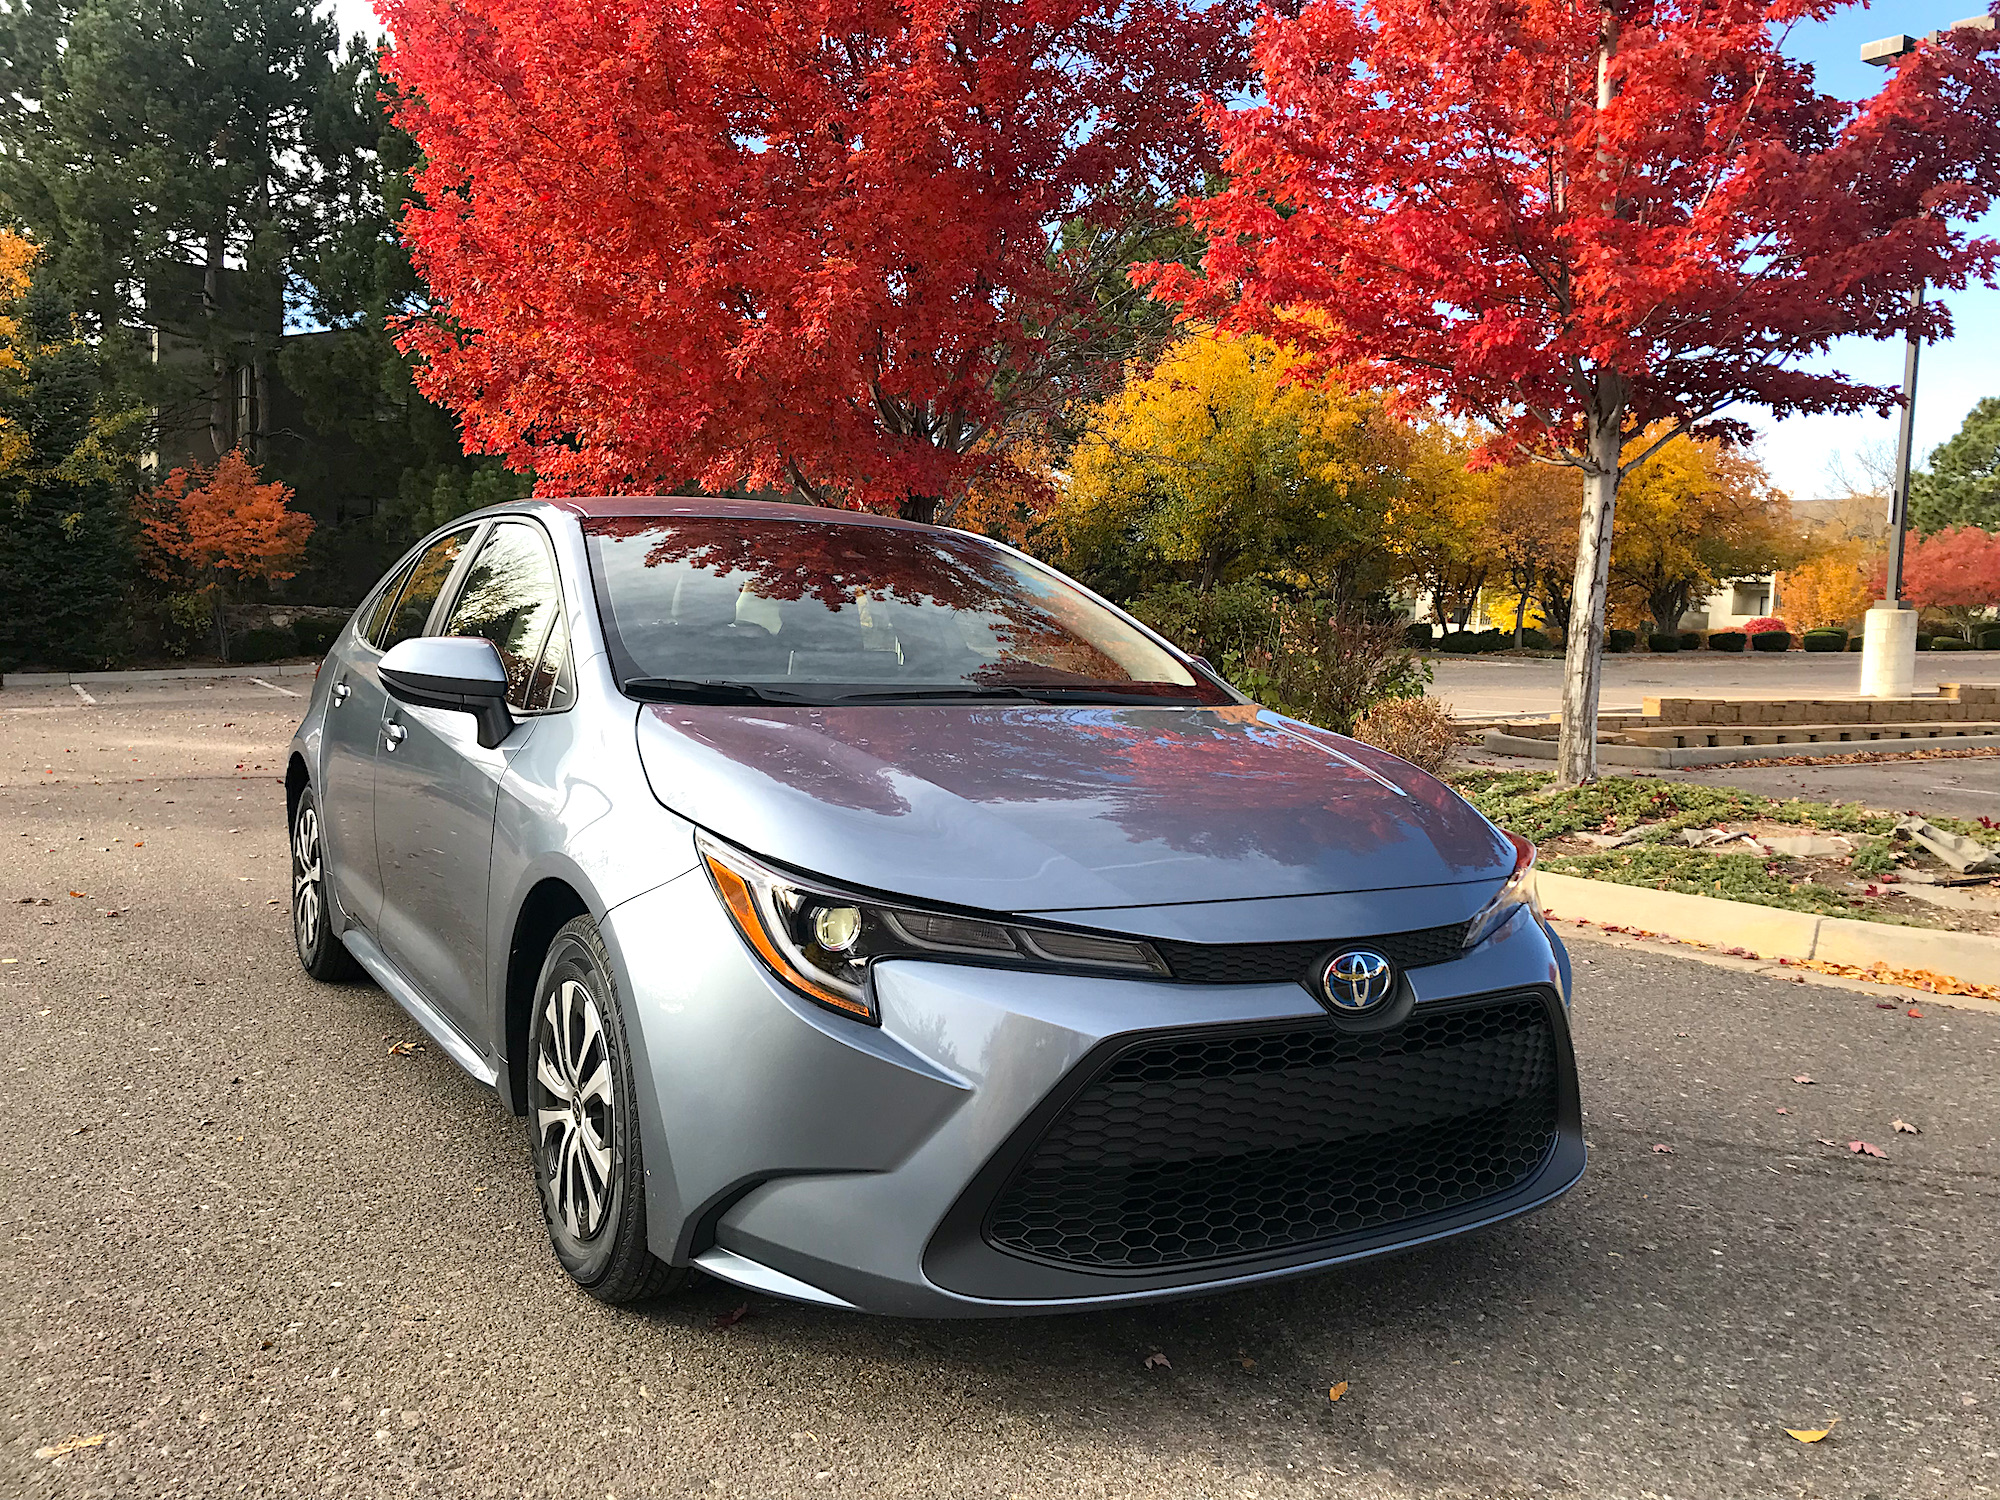 2022 Toyota Corolla Hybrid sitting next to colorful trees in a parking lot.